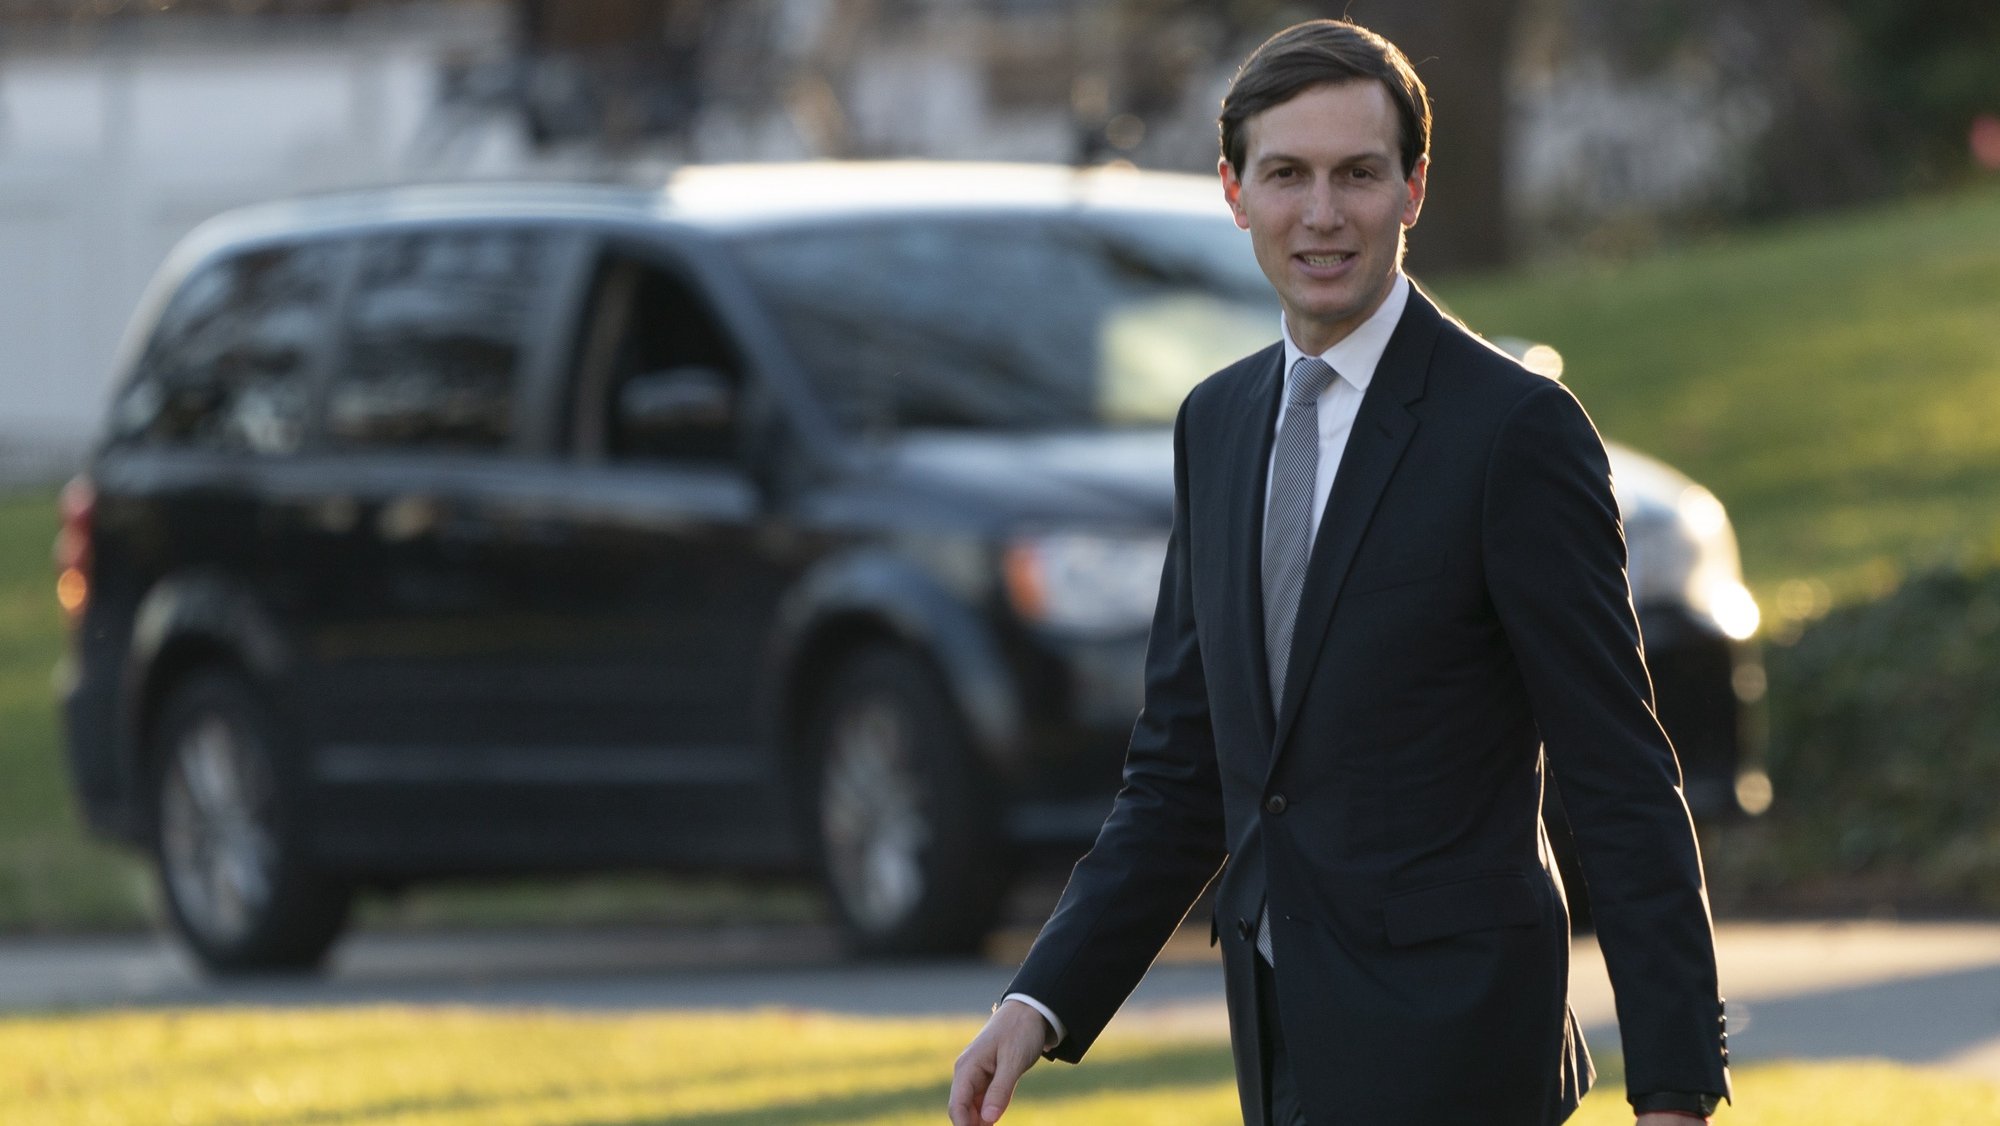 epa08901869 Senior Advisor Jared Kushner follows US President Donald J. Trump and First lady Melania Trump, as they depart the White House, in Washington, DC, USA, 23 December 2020, heading out to Mar-a-Lago in Palm Beach, Florida.  EPA/Chris Kleponis / POOL